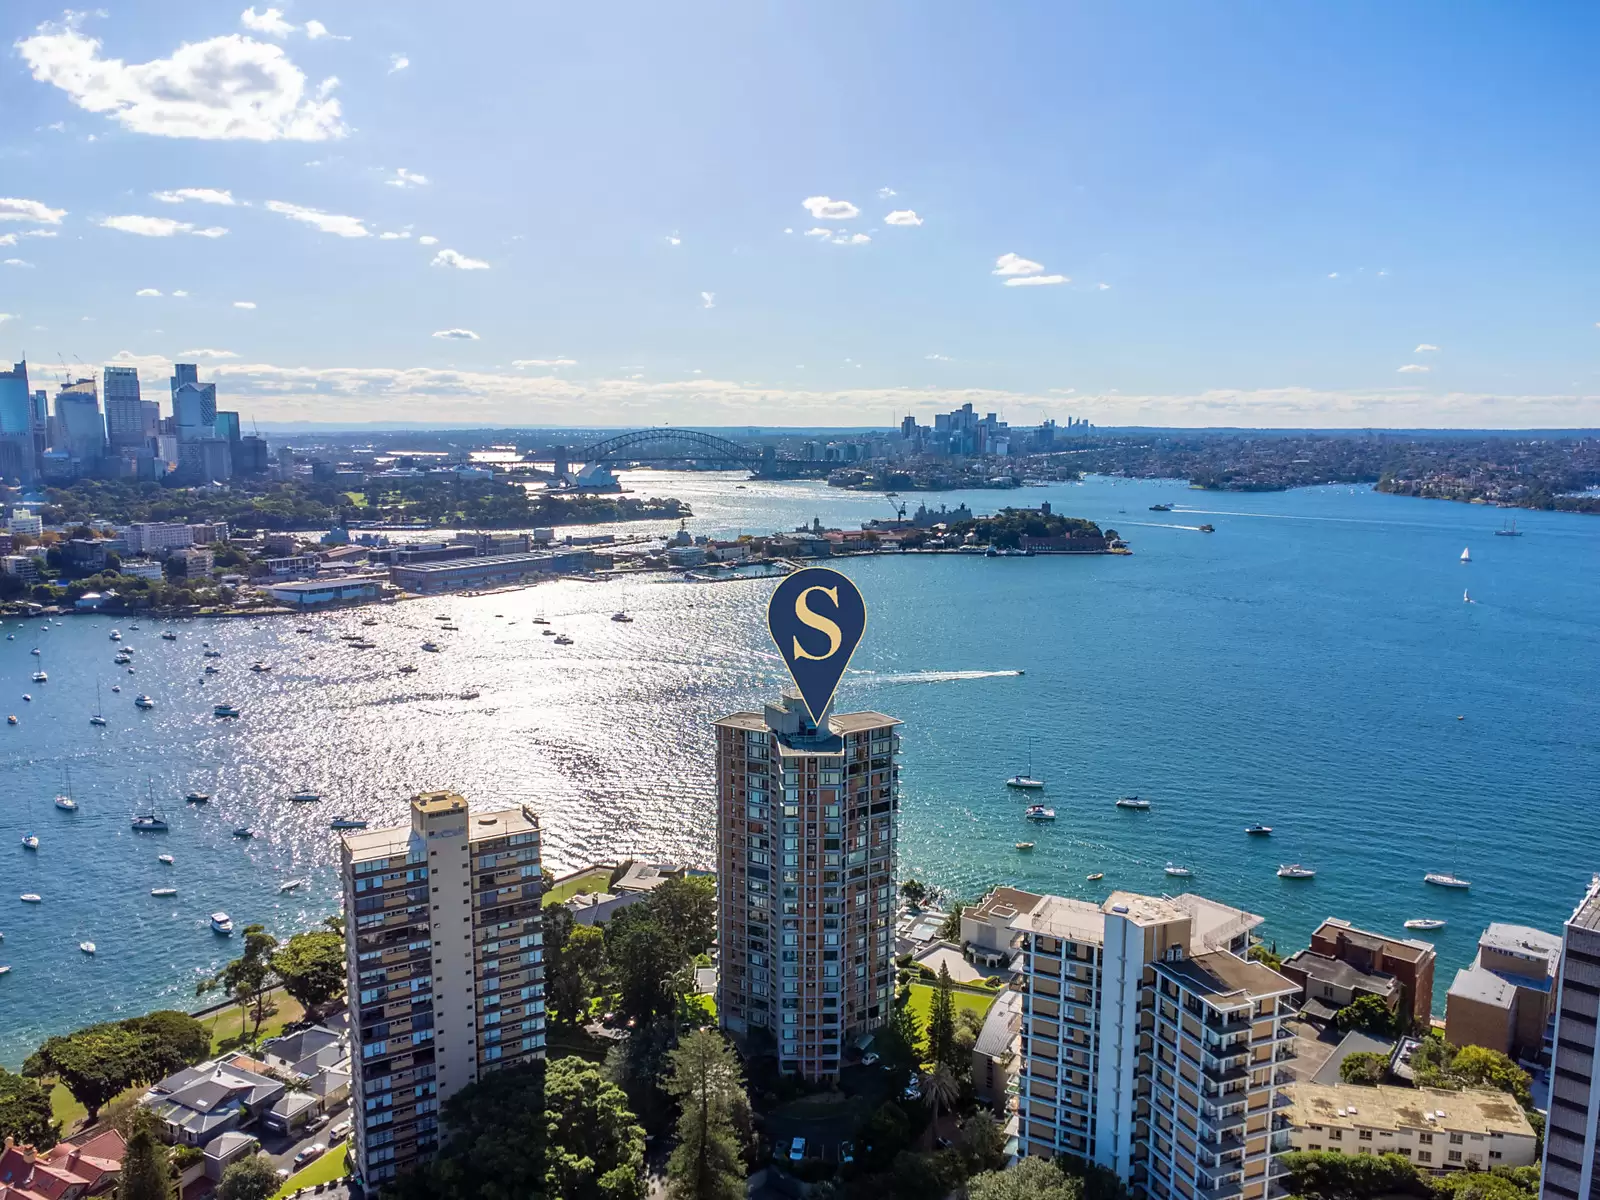 Photo #20: 3B/21 Thornton Street, Darling Point - Sold by Sydney Sotheby's International Realty